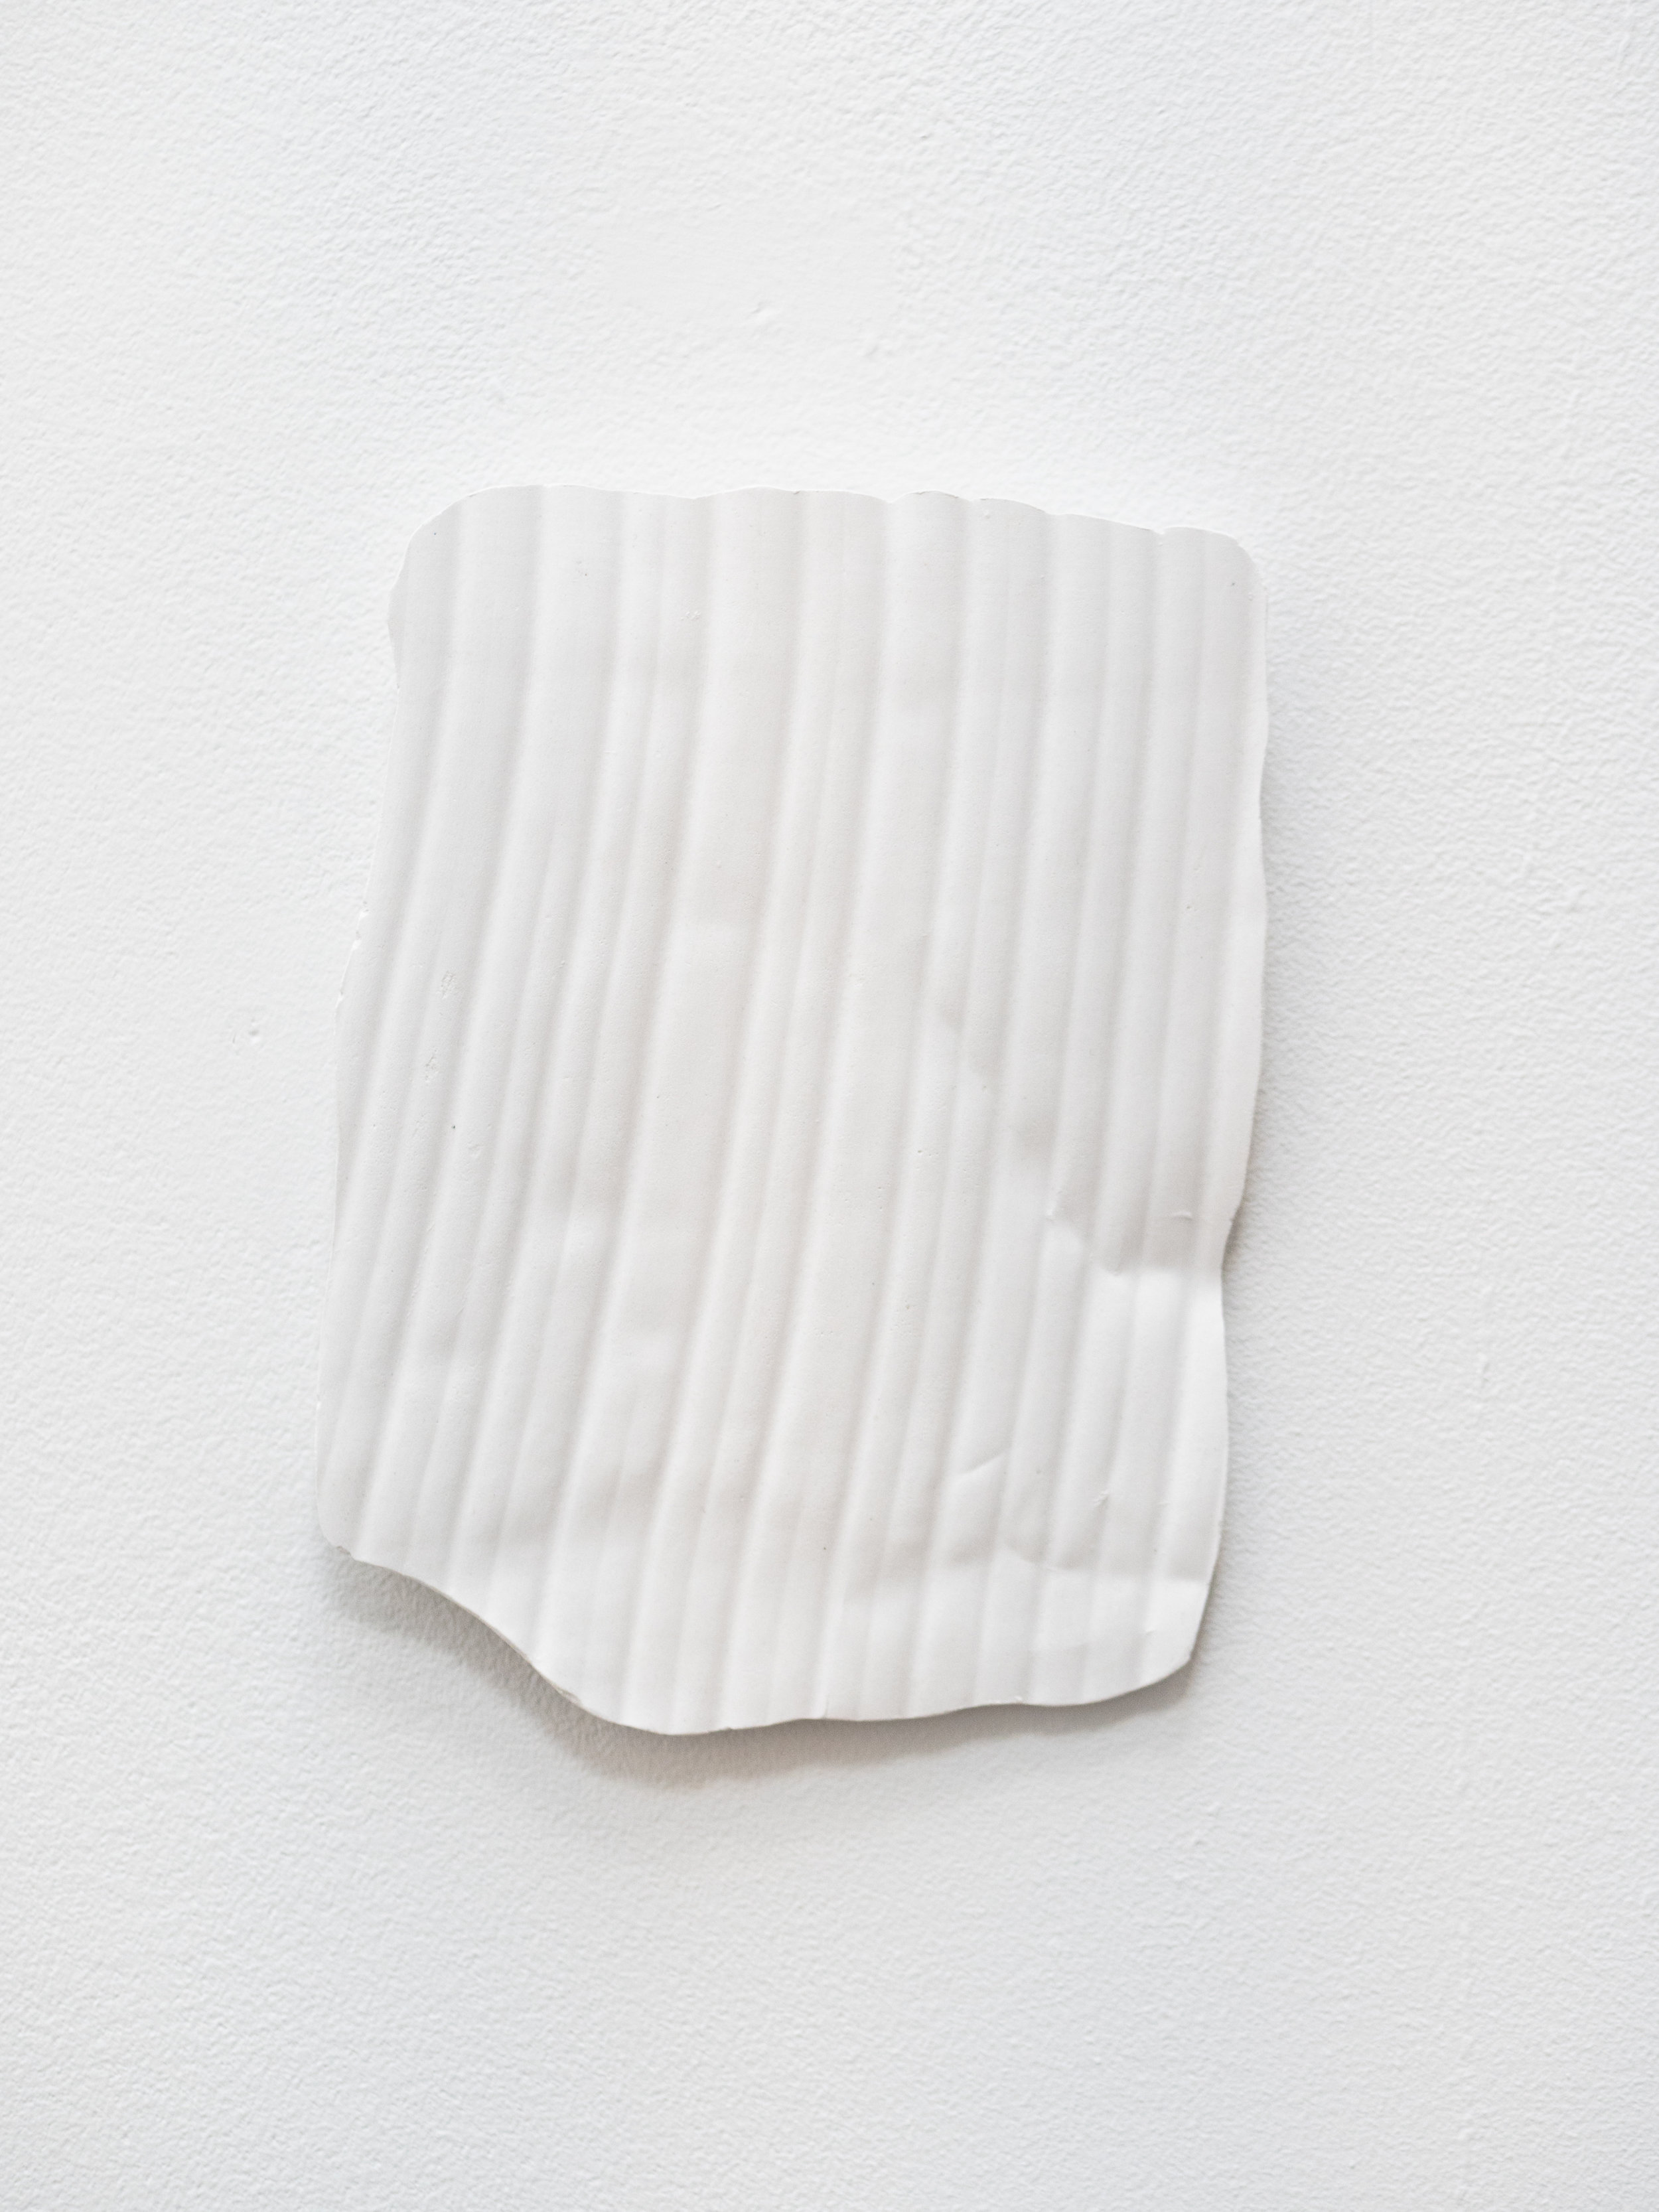  kamay mould, 2017, plaster, 6.5 x 5 inches 